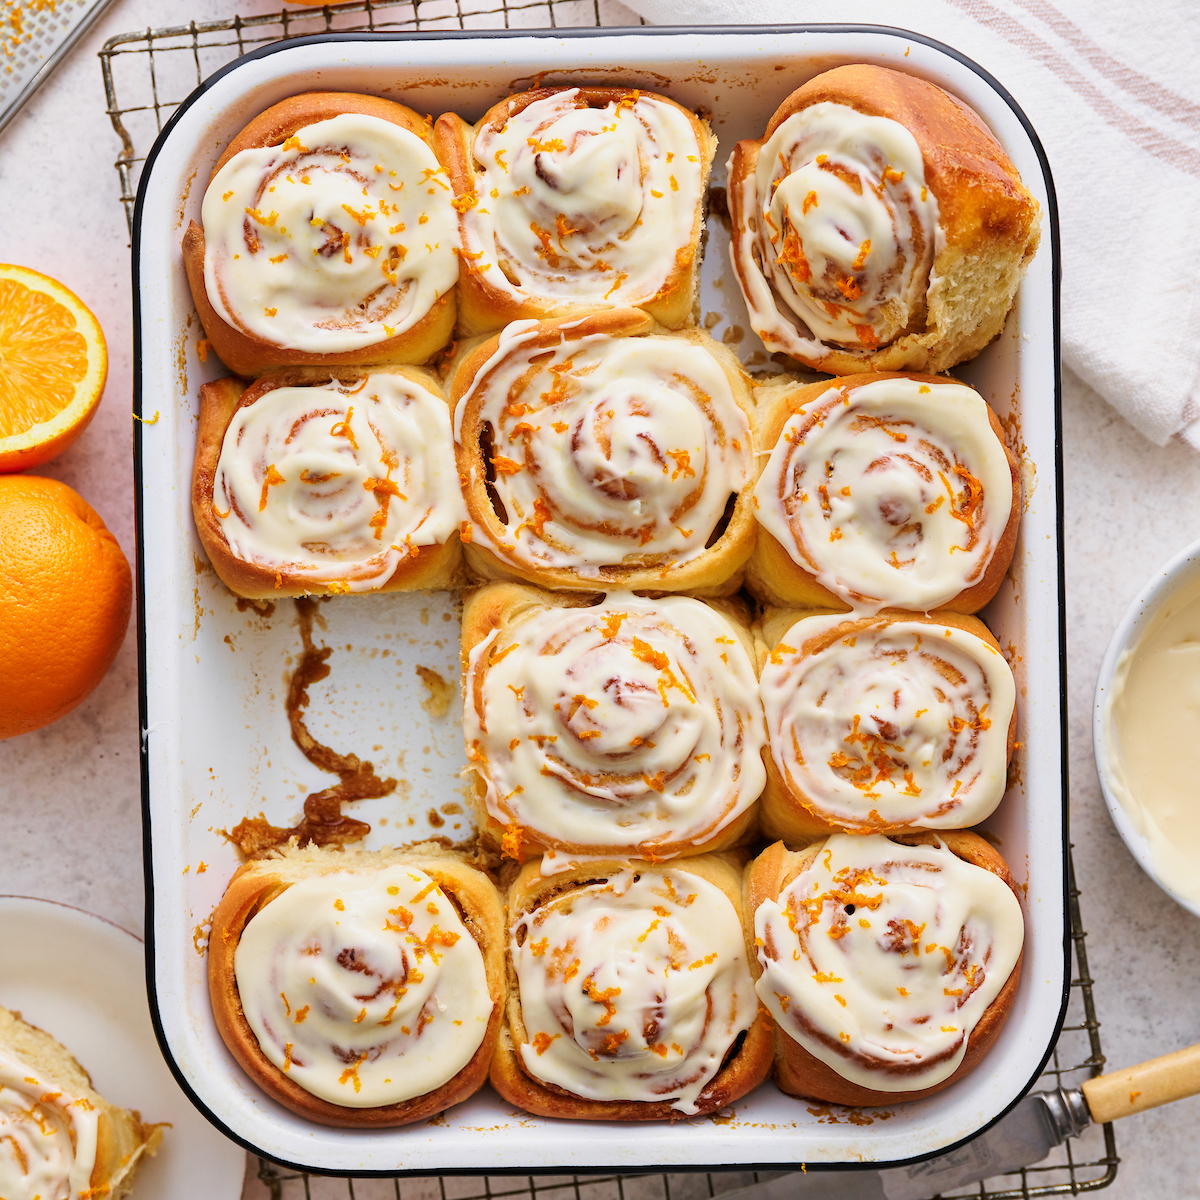 Soft and fluffy orange rolls are loaded with fresh orange flavor and slathered in cream cheese frosting! This special breakfast treat is a Christmas morning tradition in our house... but they're so good we've started making them for Easter, Mother's Day and sometimes, just because! Serve warm, straight from the baking dish!